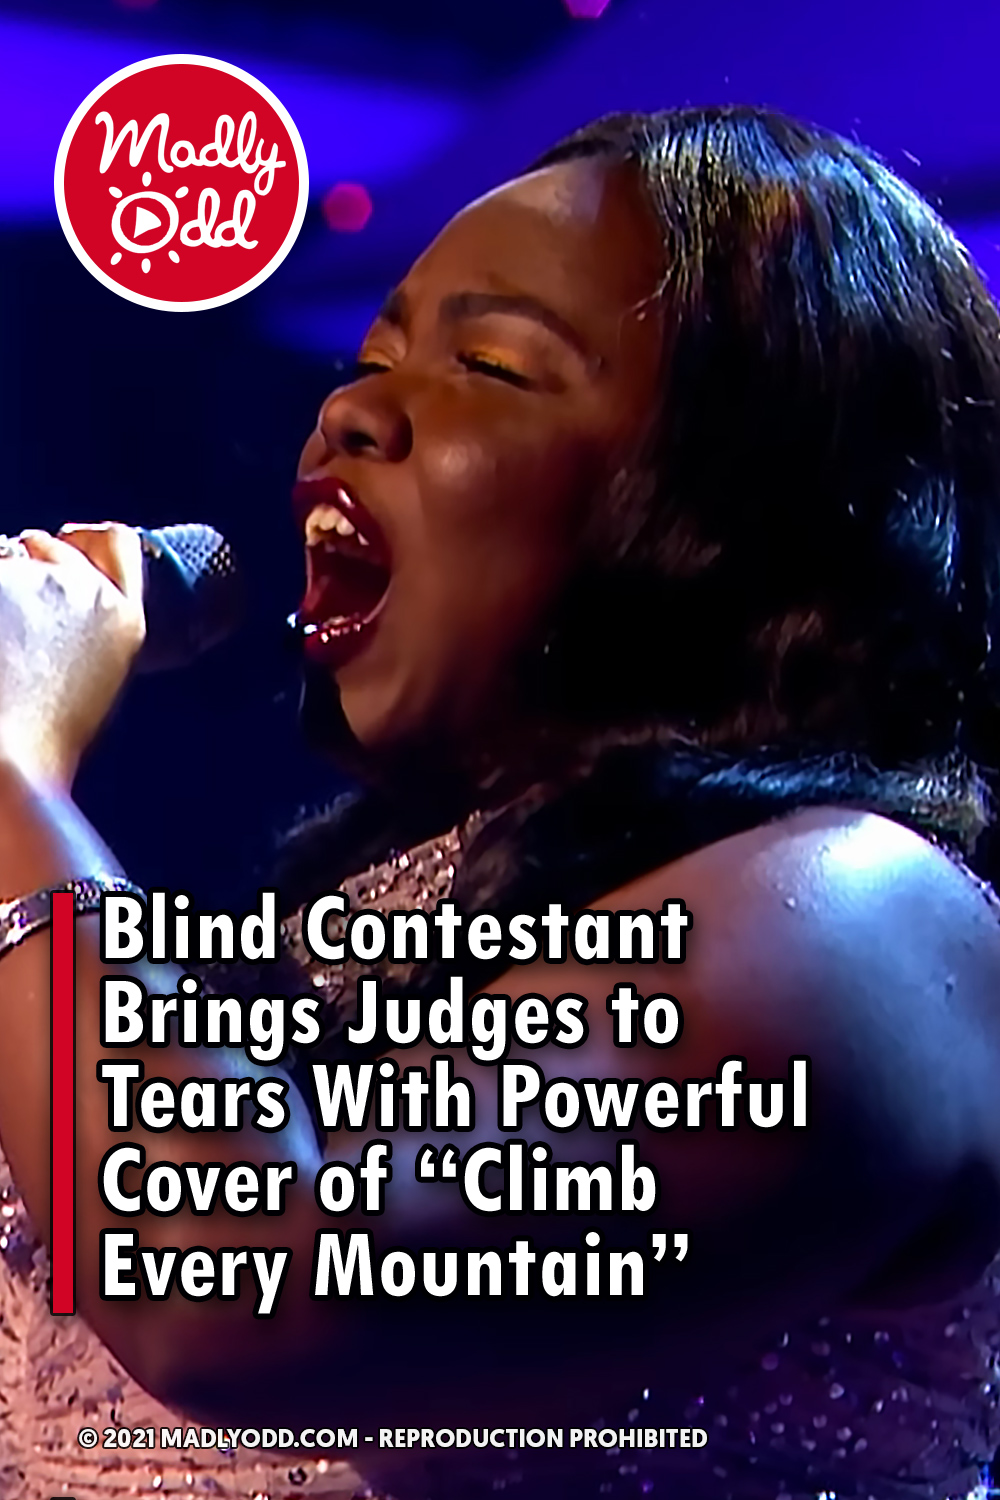 Blind Contestant Brings Judges to Tears With Powerful Cover of “Climb Every Mountain”